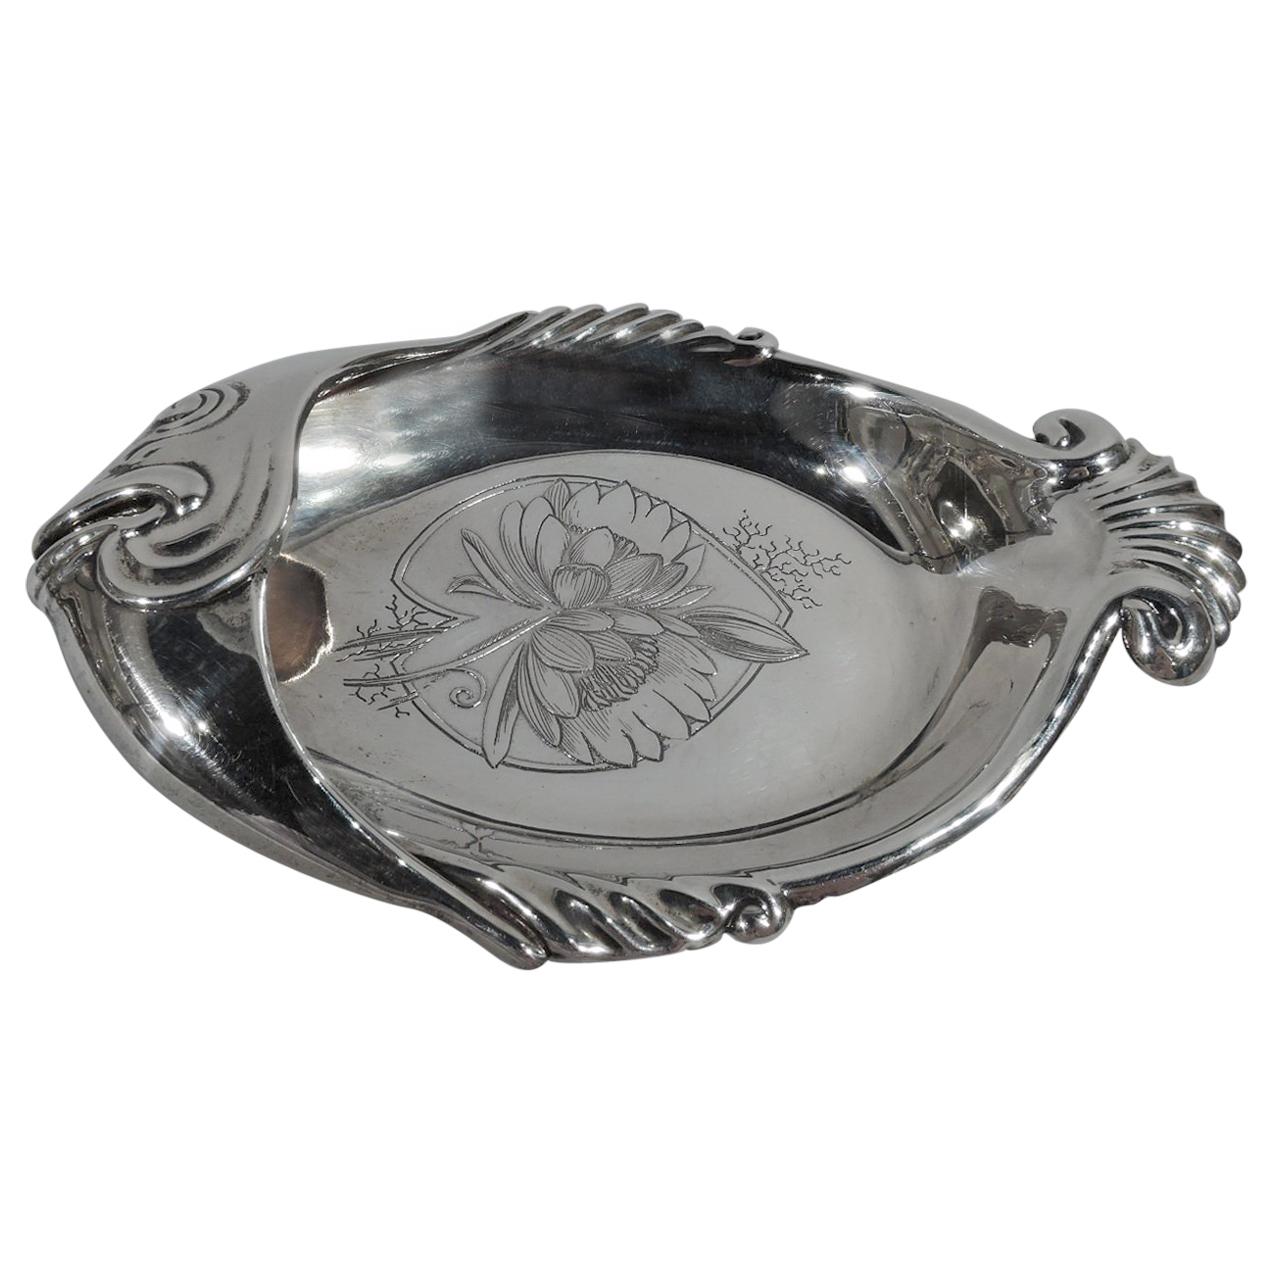 American Aesthetic Japonesque Sterling Silver Fish Dish by Whiting